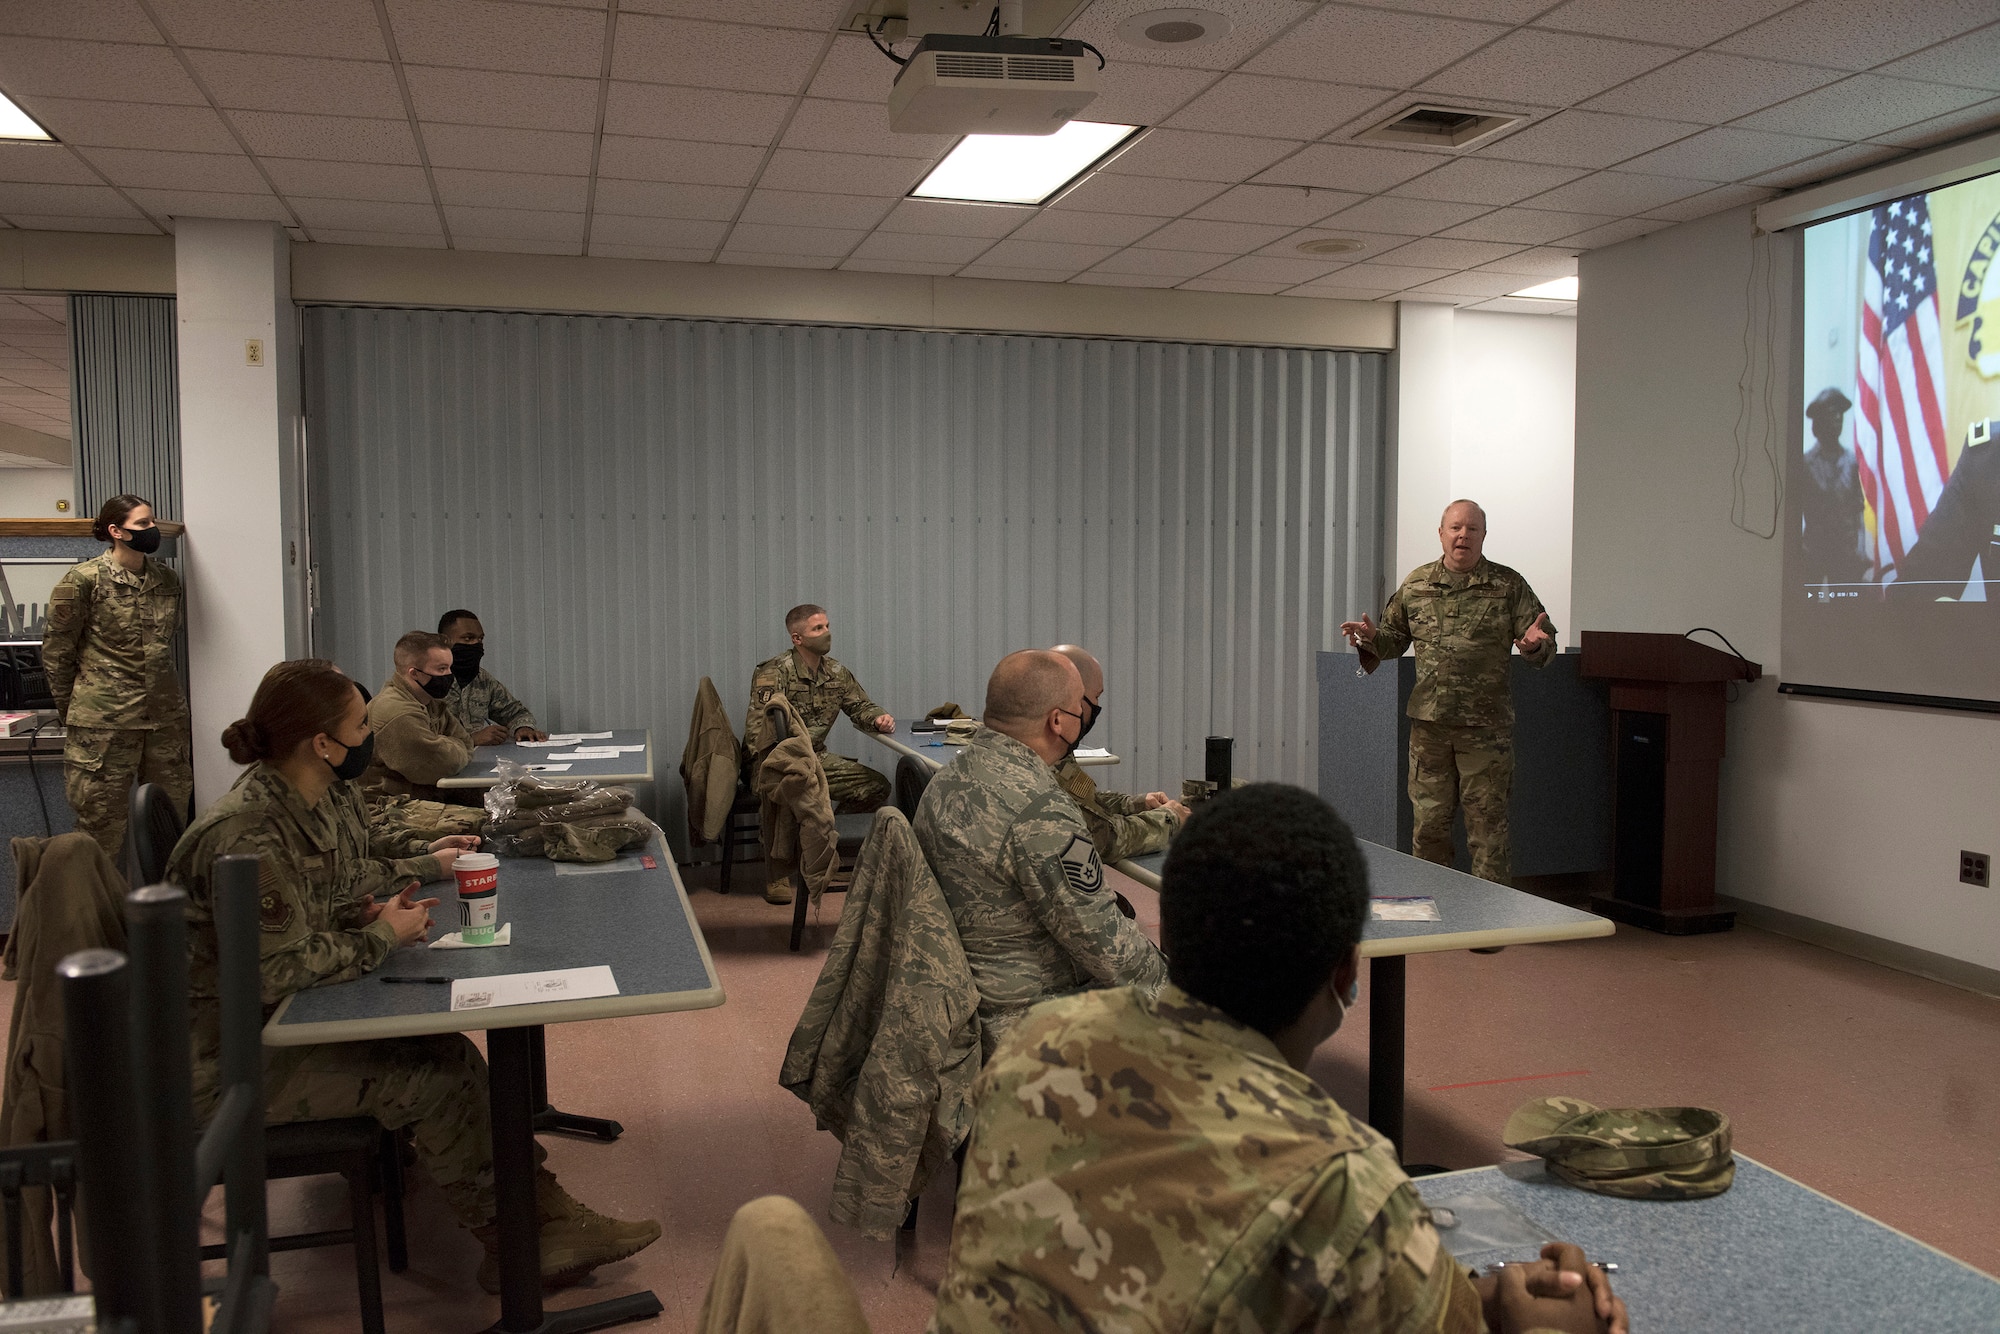 U.S. Air Force Brig. Gen. Michael Regan, Deputy Adjutant General-Air, Pennsylvania Air National Guard, addresses Airmen of the 193rd Force Support Squadron prior to deploying to the Capitol region in support of service members in the D.C. area for the 59th Presidential Inauguration.